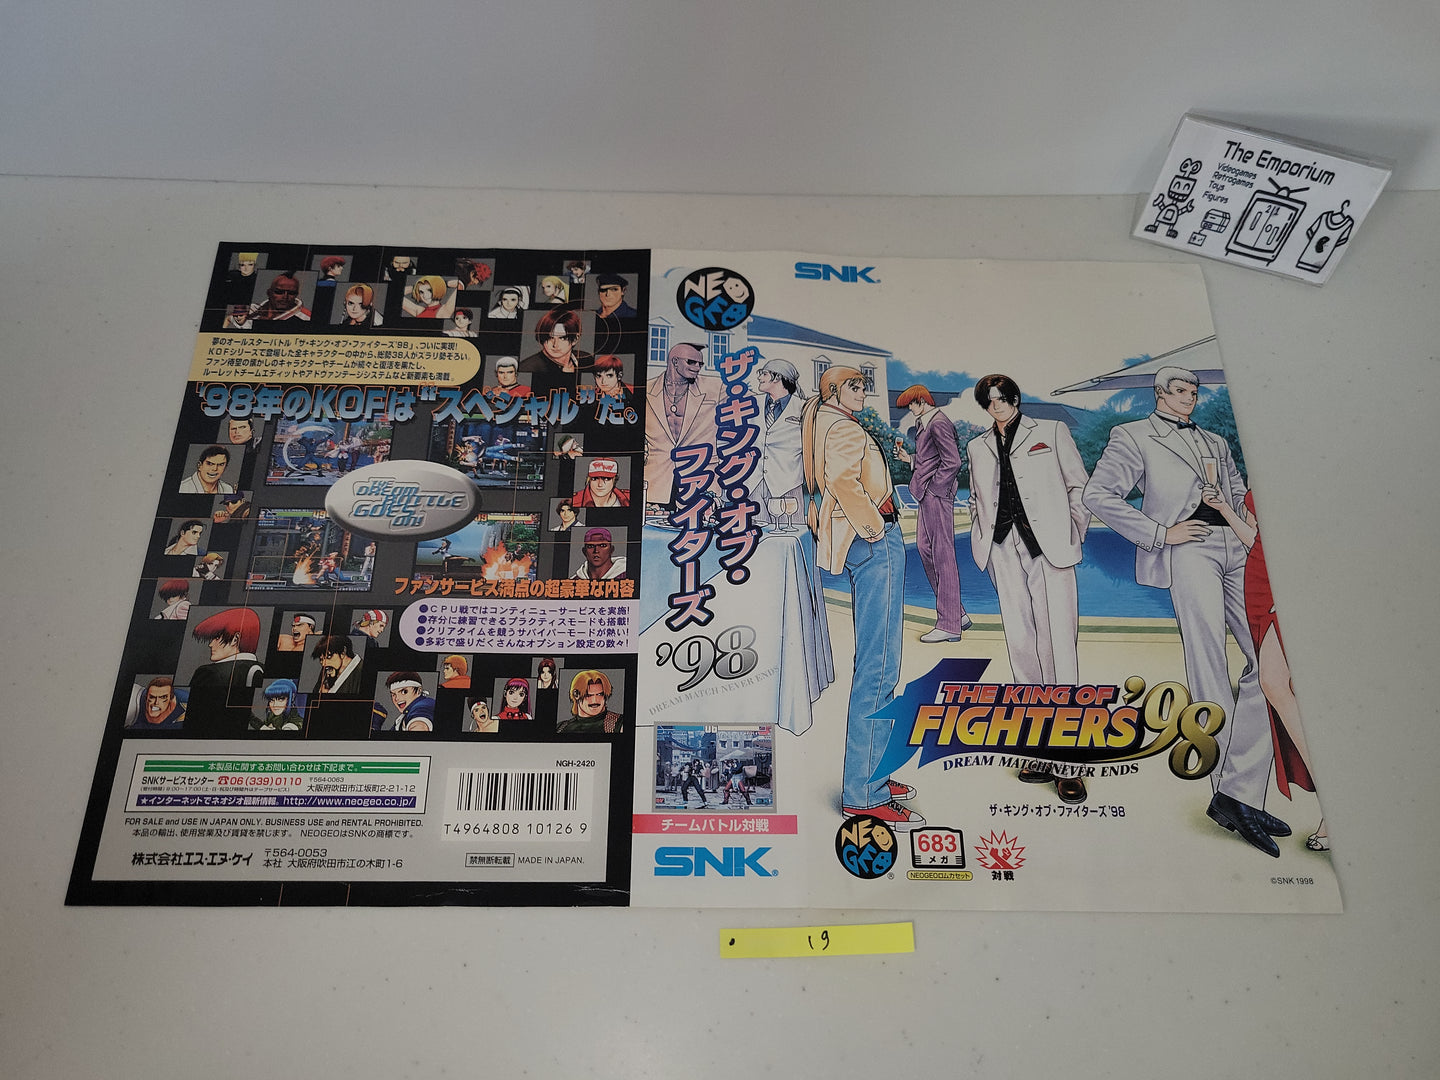 Brayan - The King of Fighters 98 Insert - Snk Neogeo AES NG